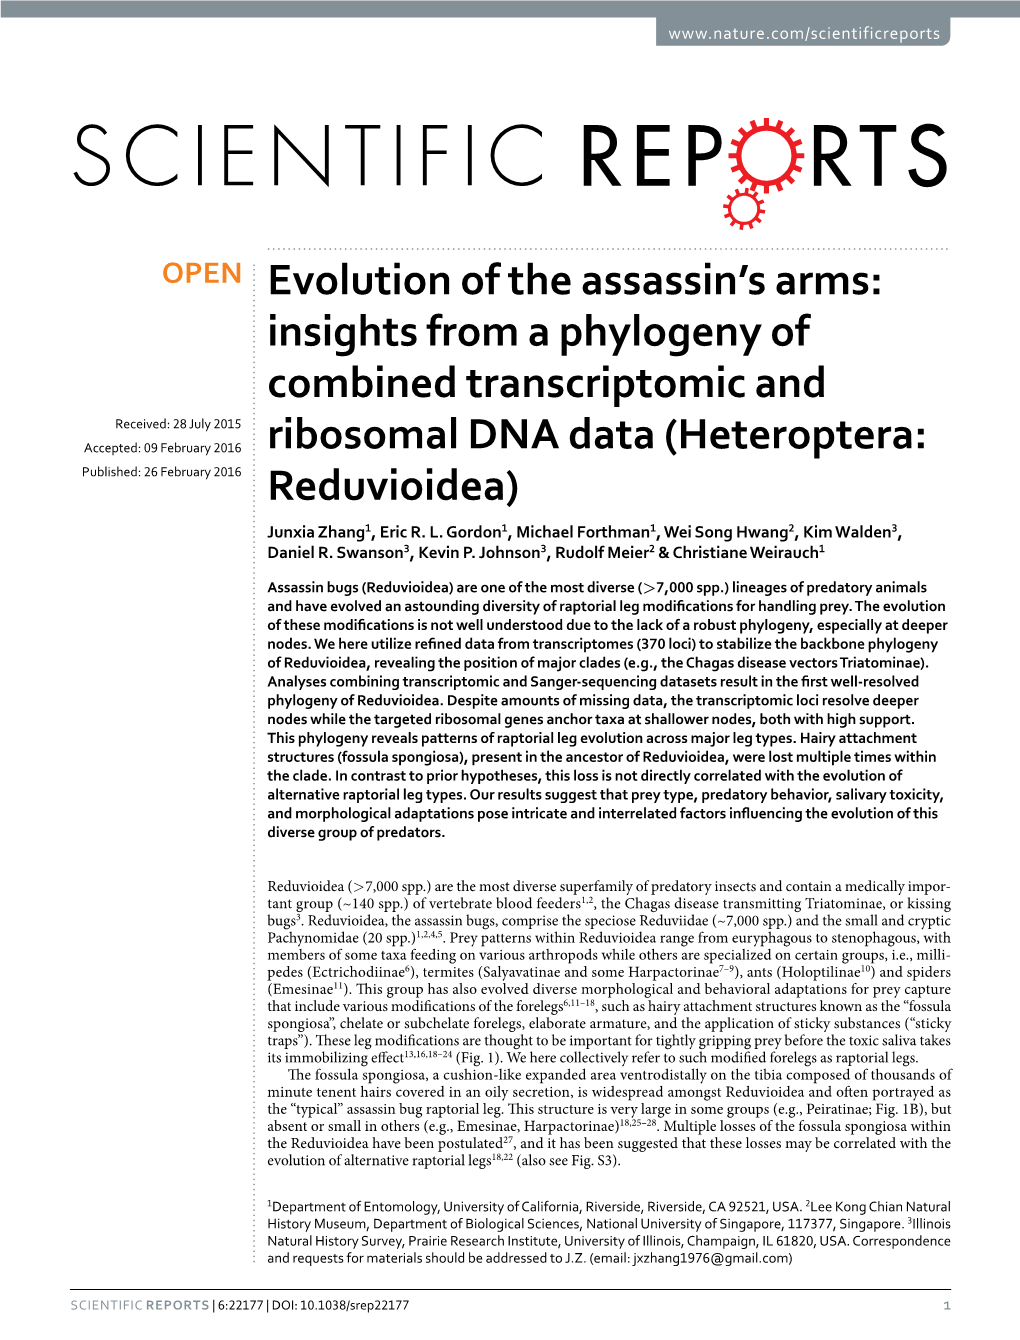 Insights from a Phylogeny of Combined Transcriptomic And